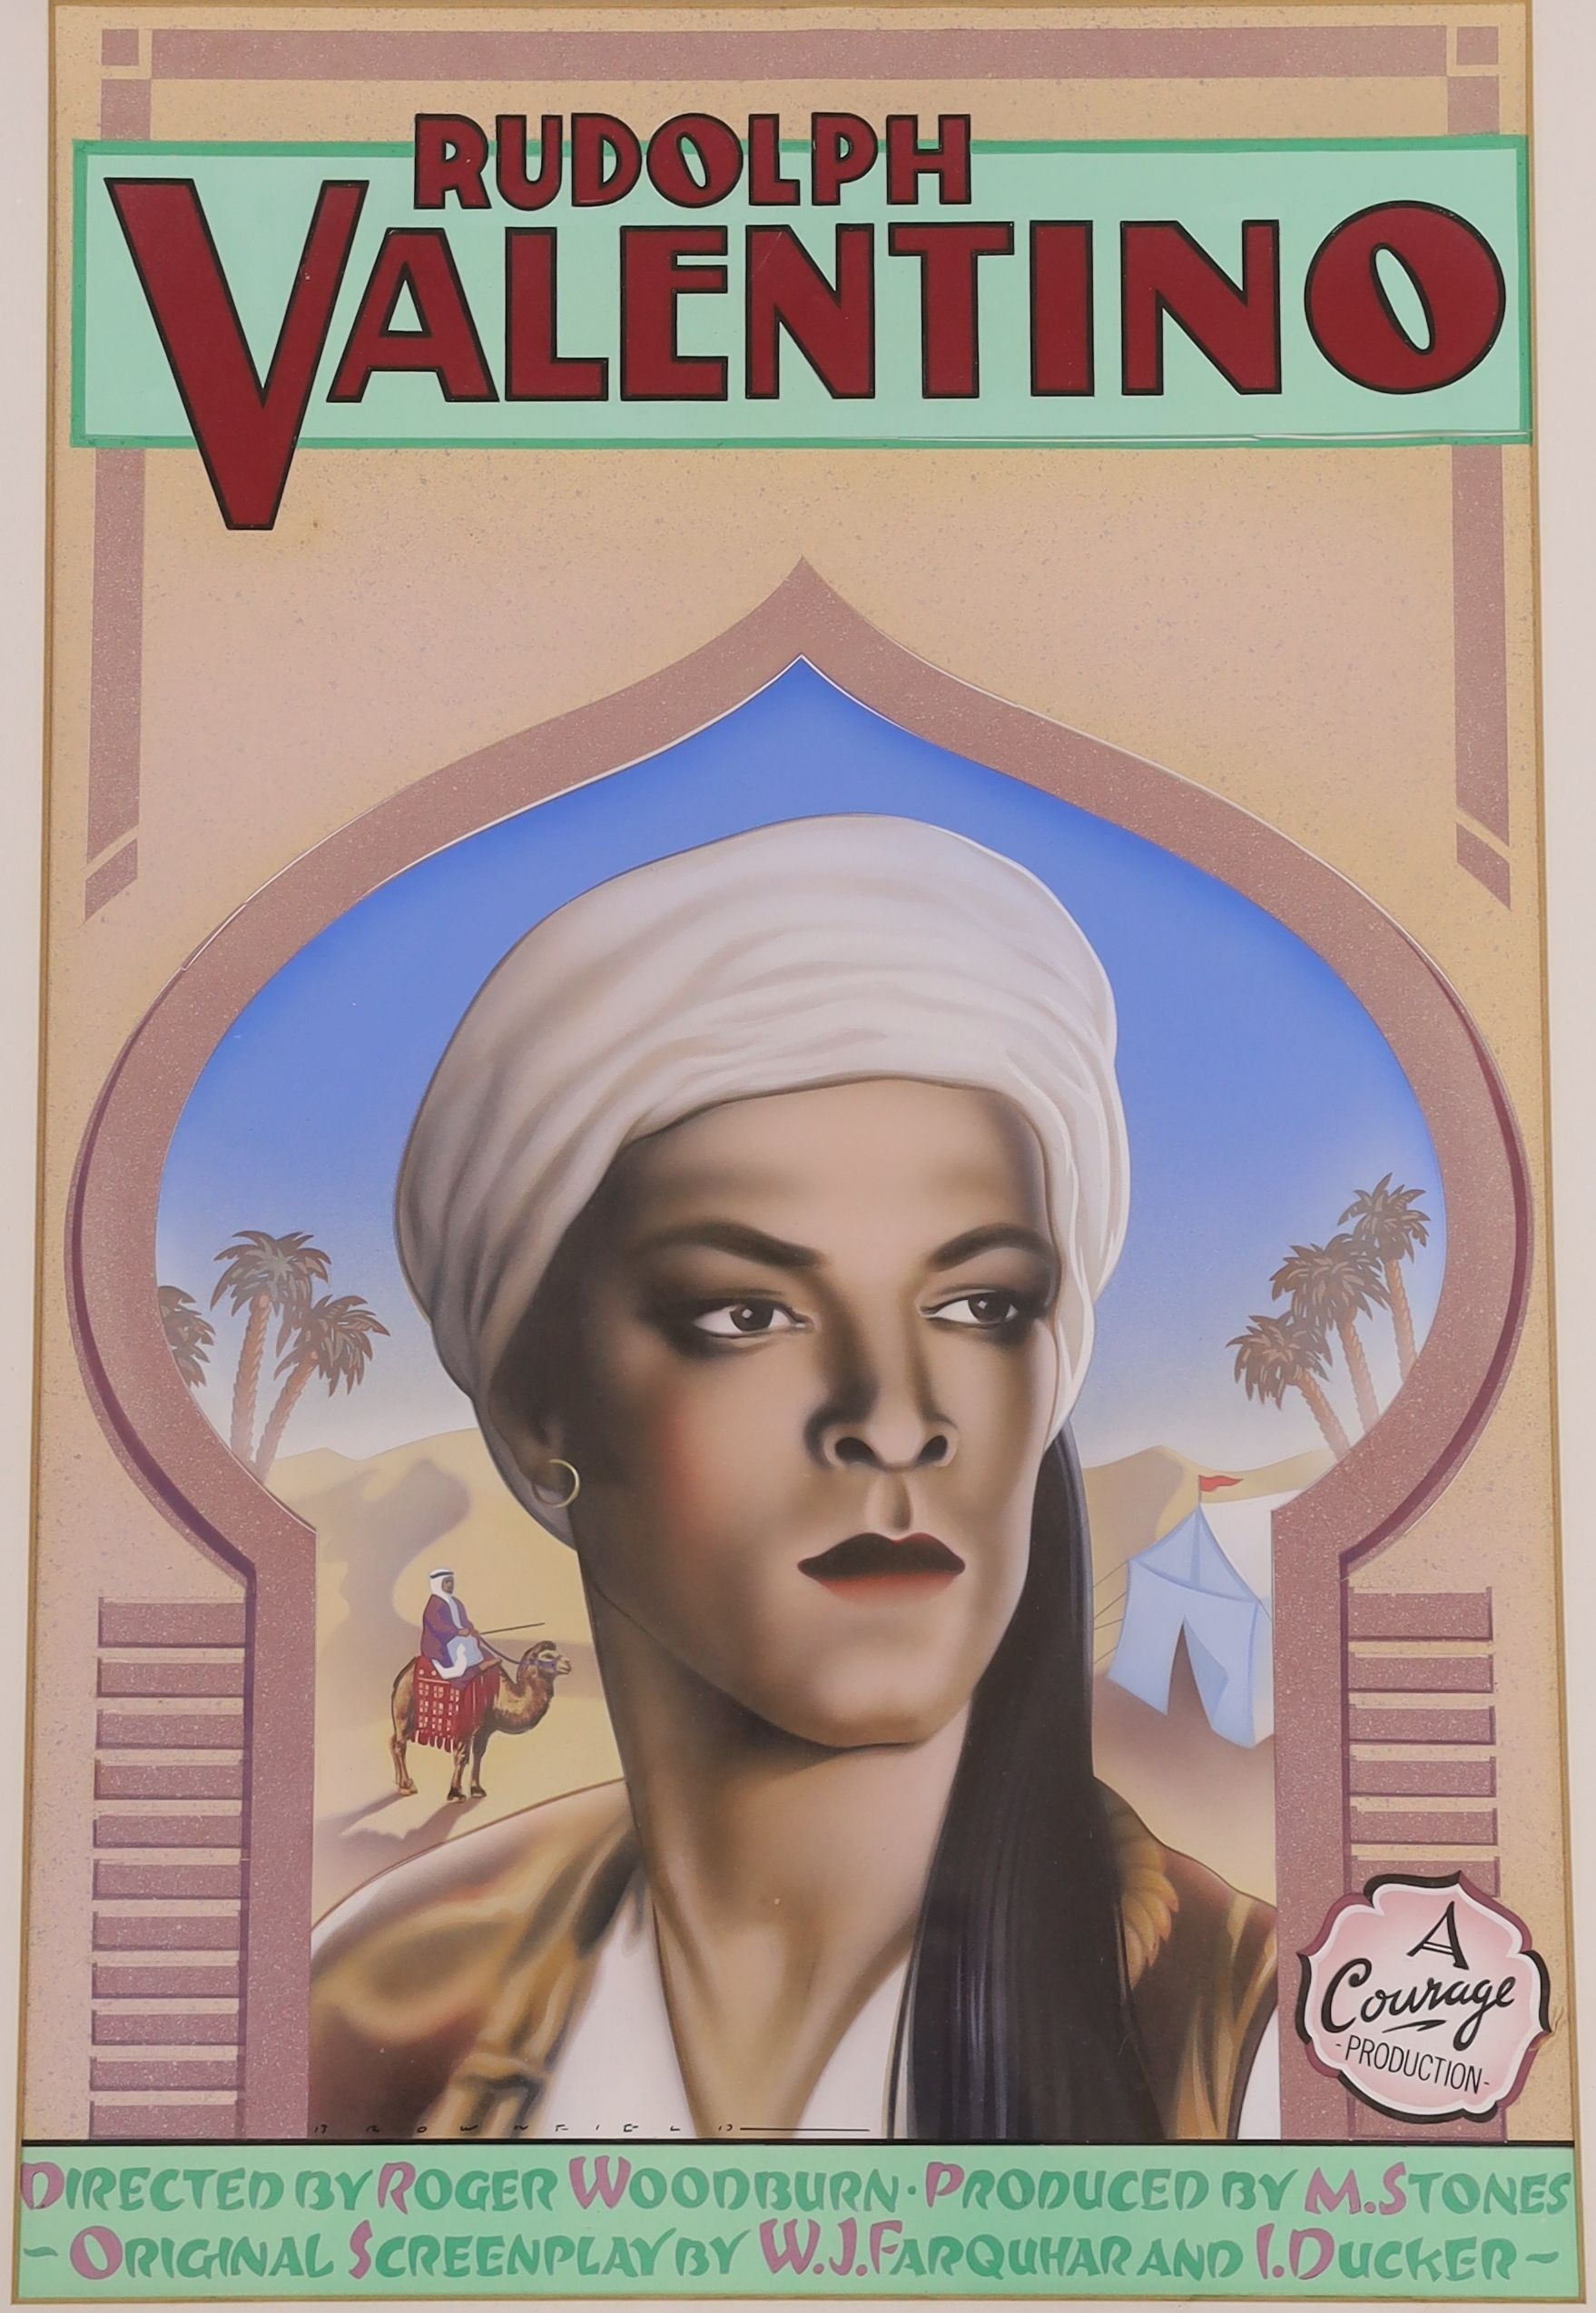 Brownfield, gouache and airbrush, Original artwork for Rudolph Valentino film poster, signed, 57 x 37cm